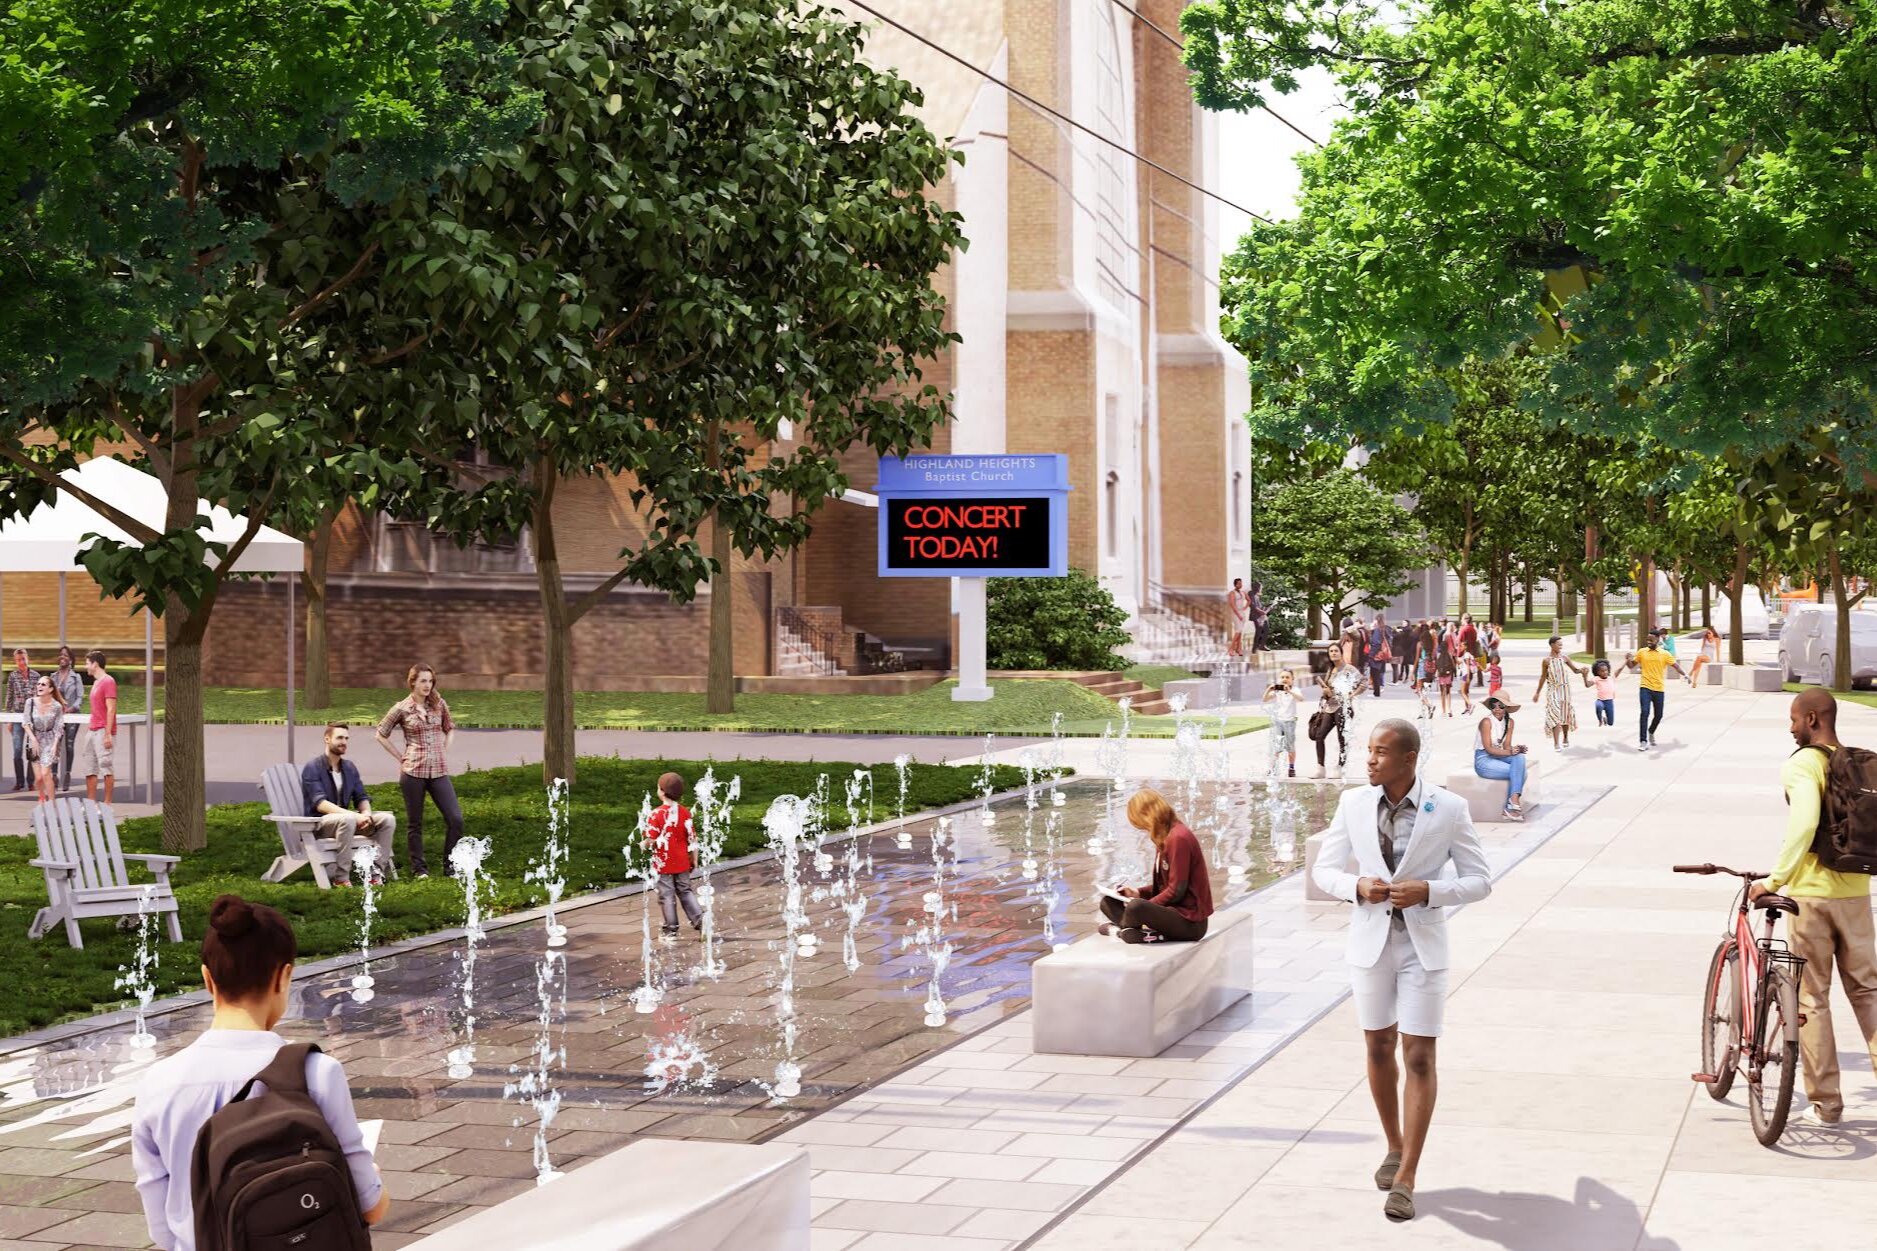 An interactive fountain, which would operate much like a splash pad, would provide a place for children to have fun and cool off.